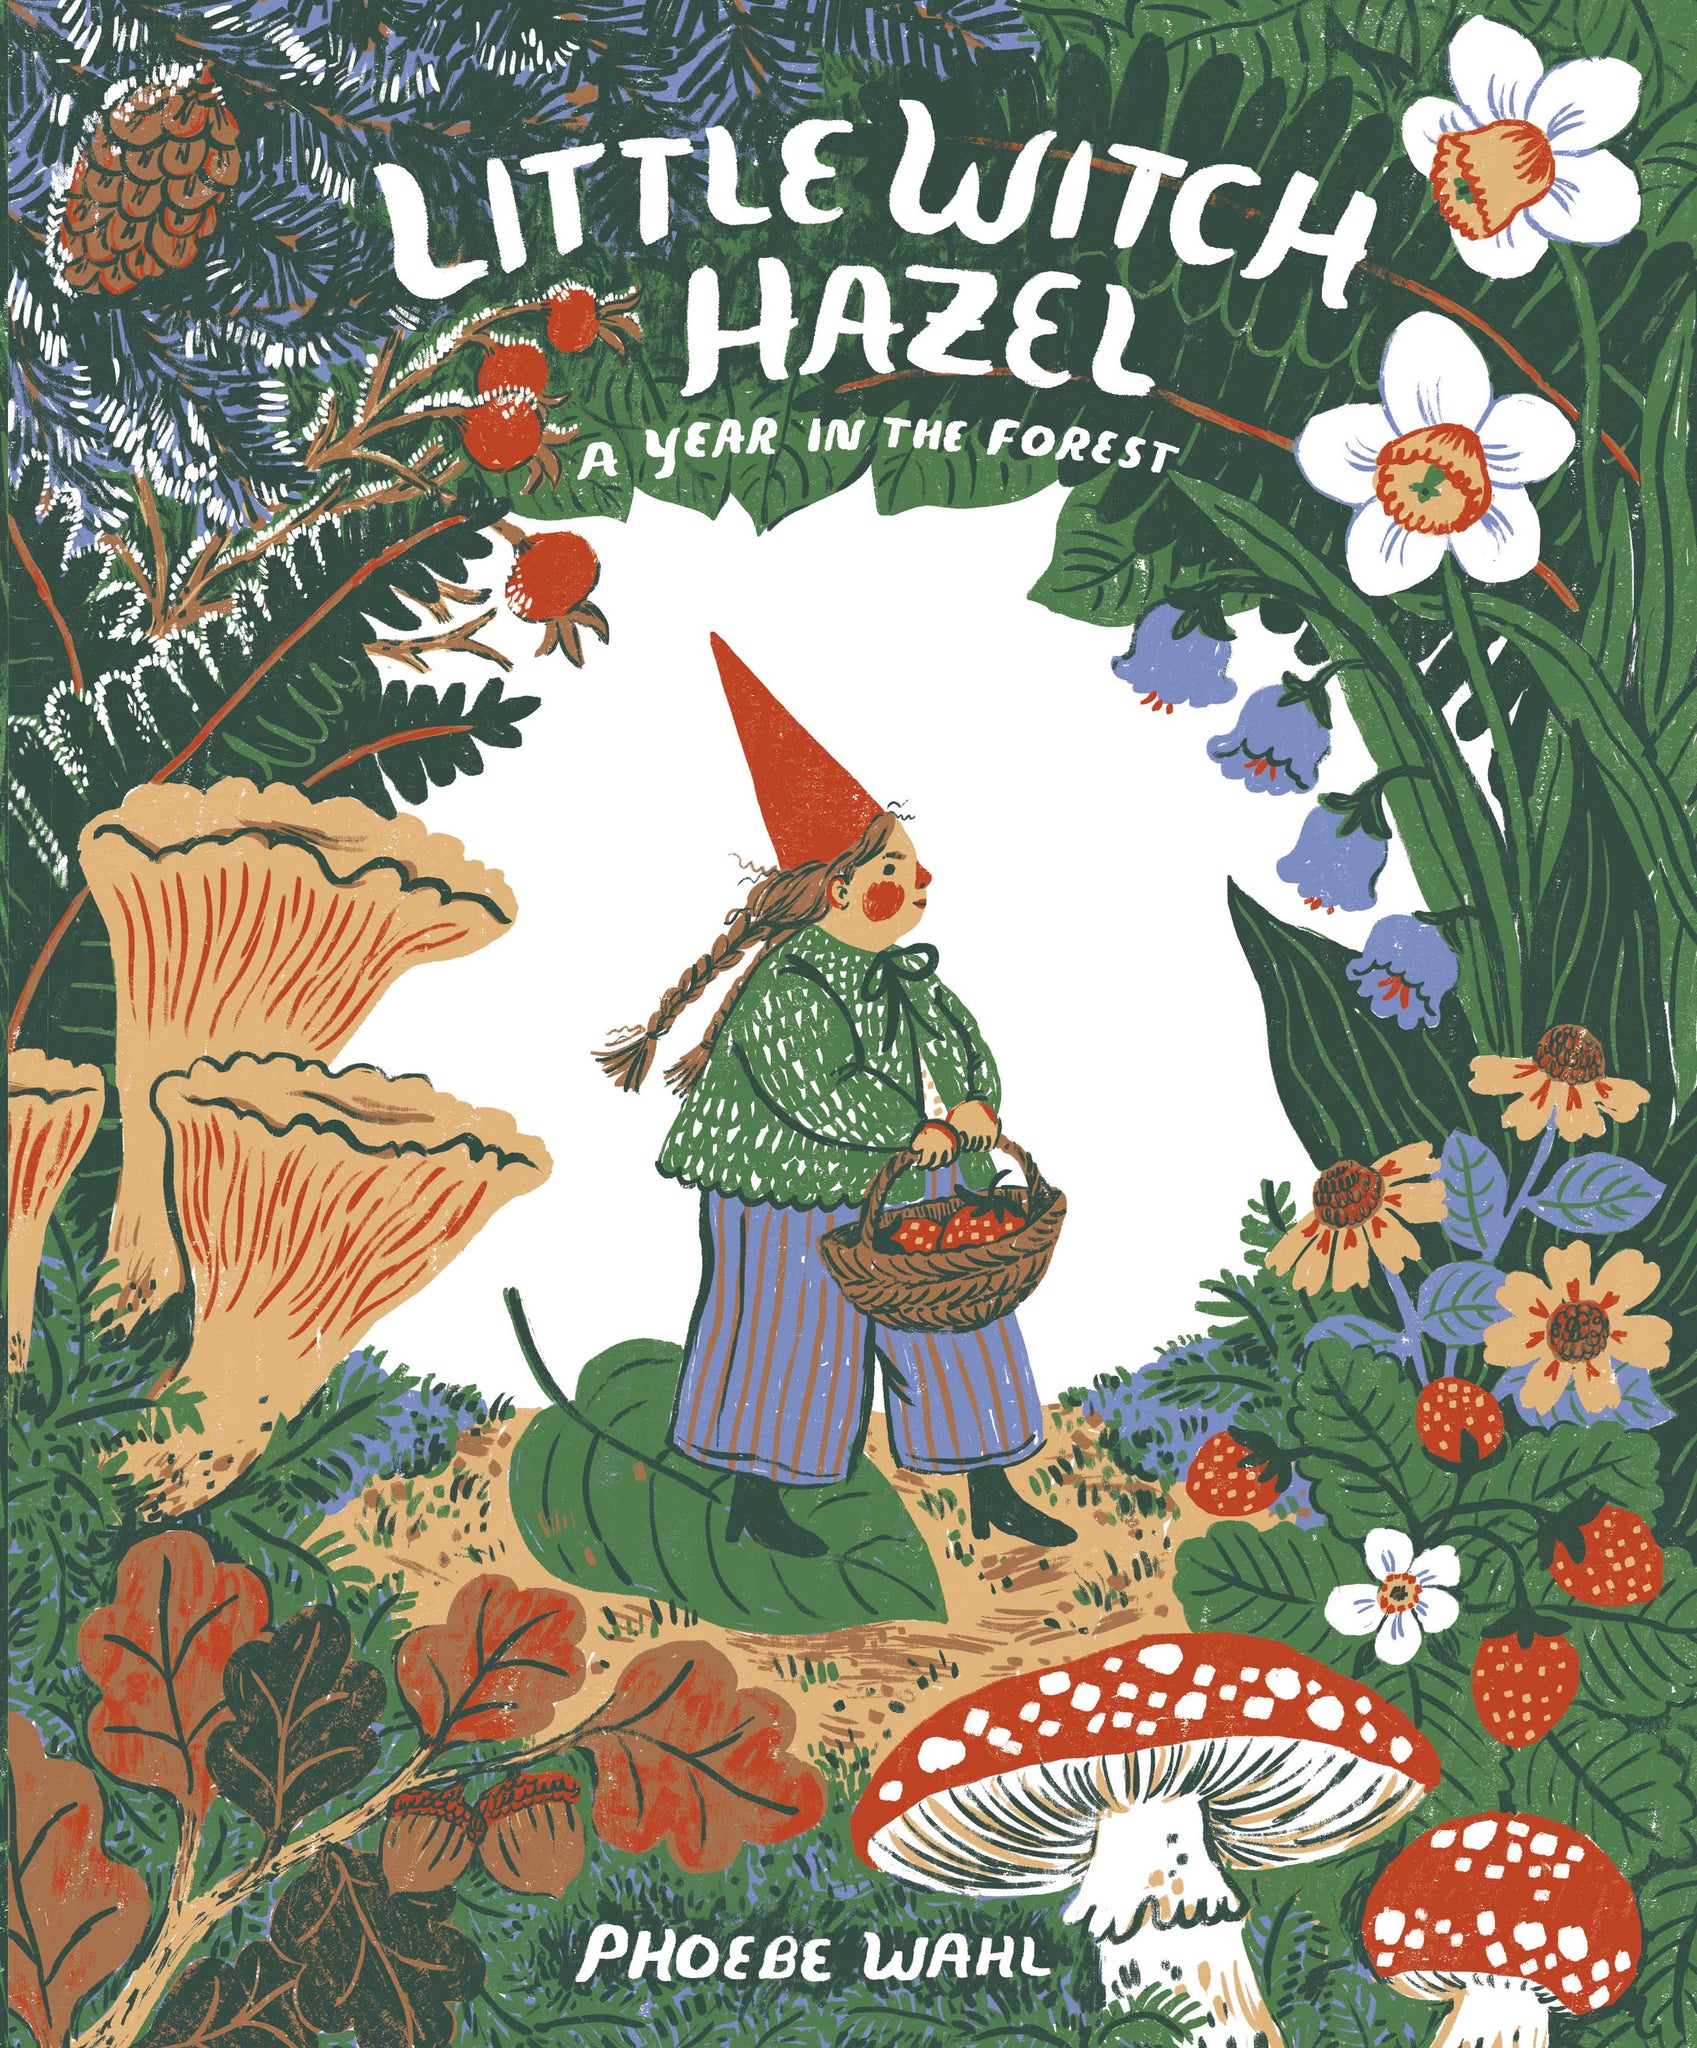 little witch hazel: a year in the forest